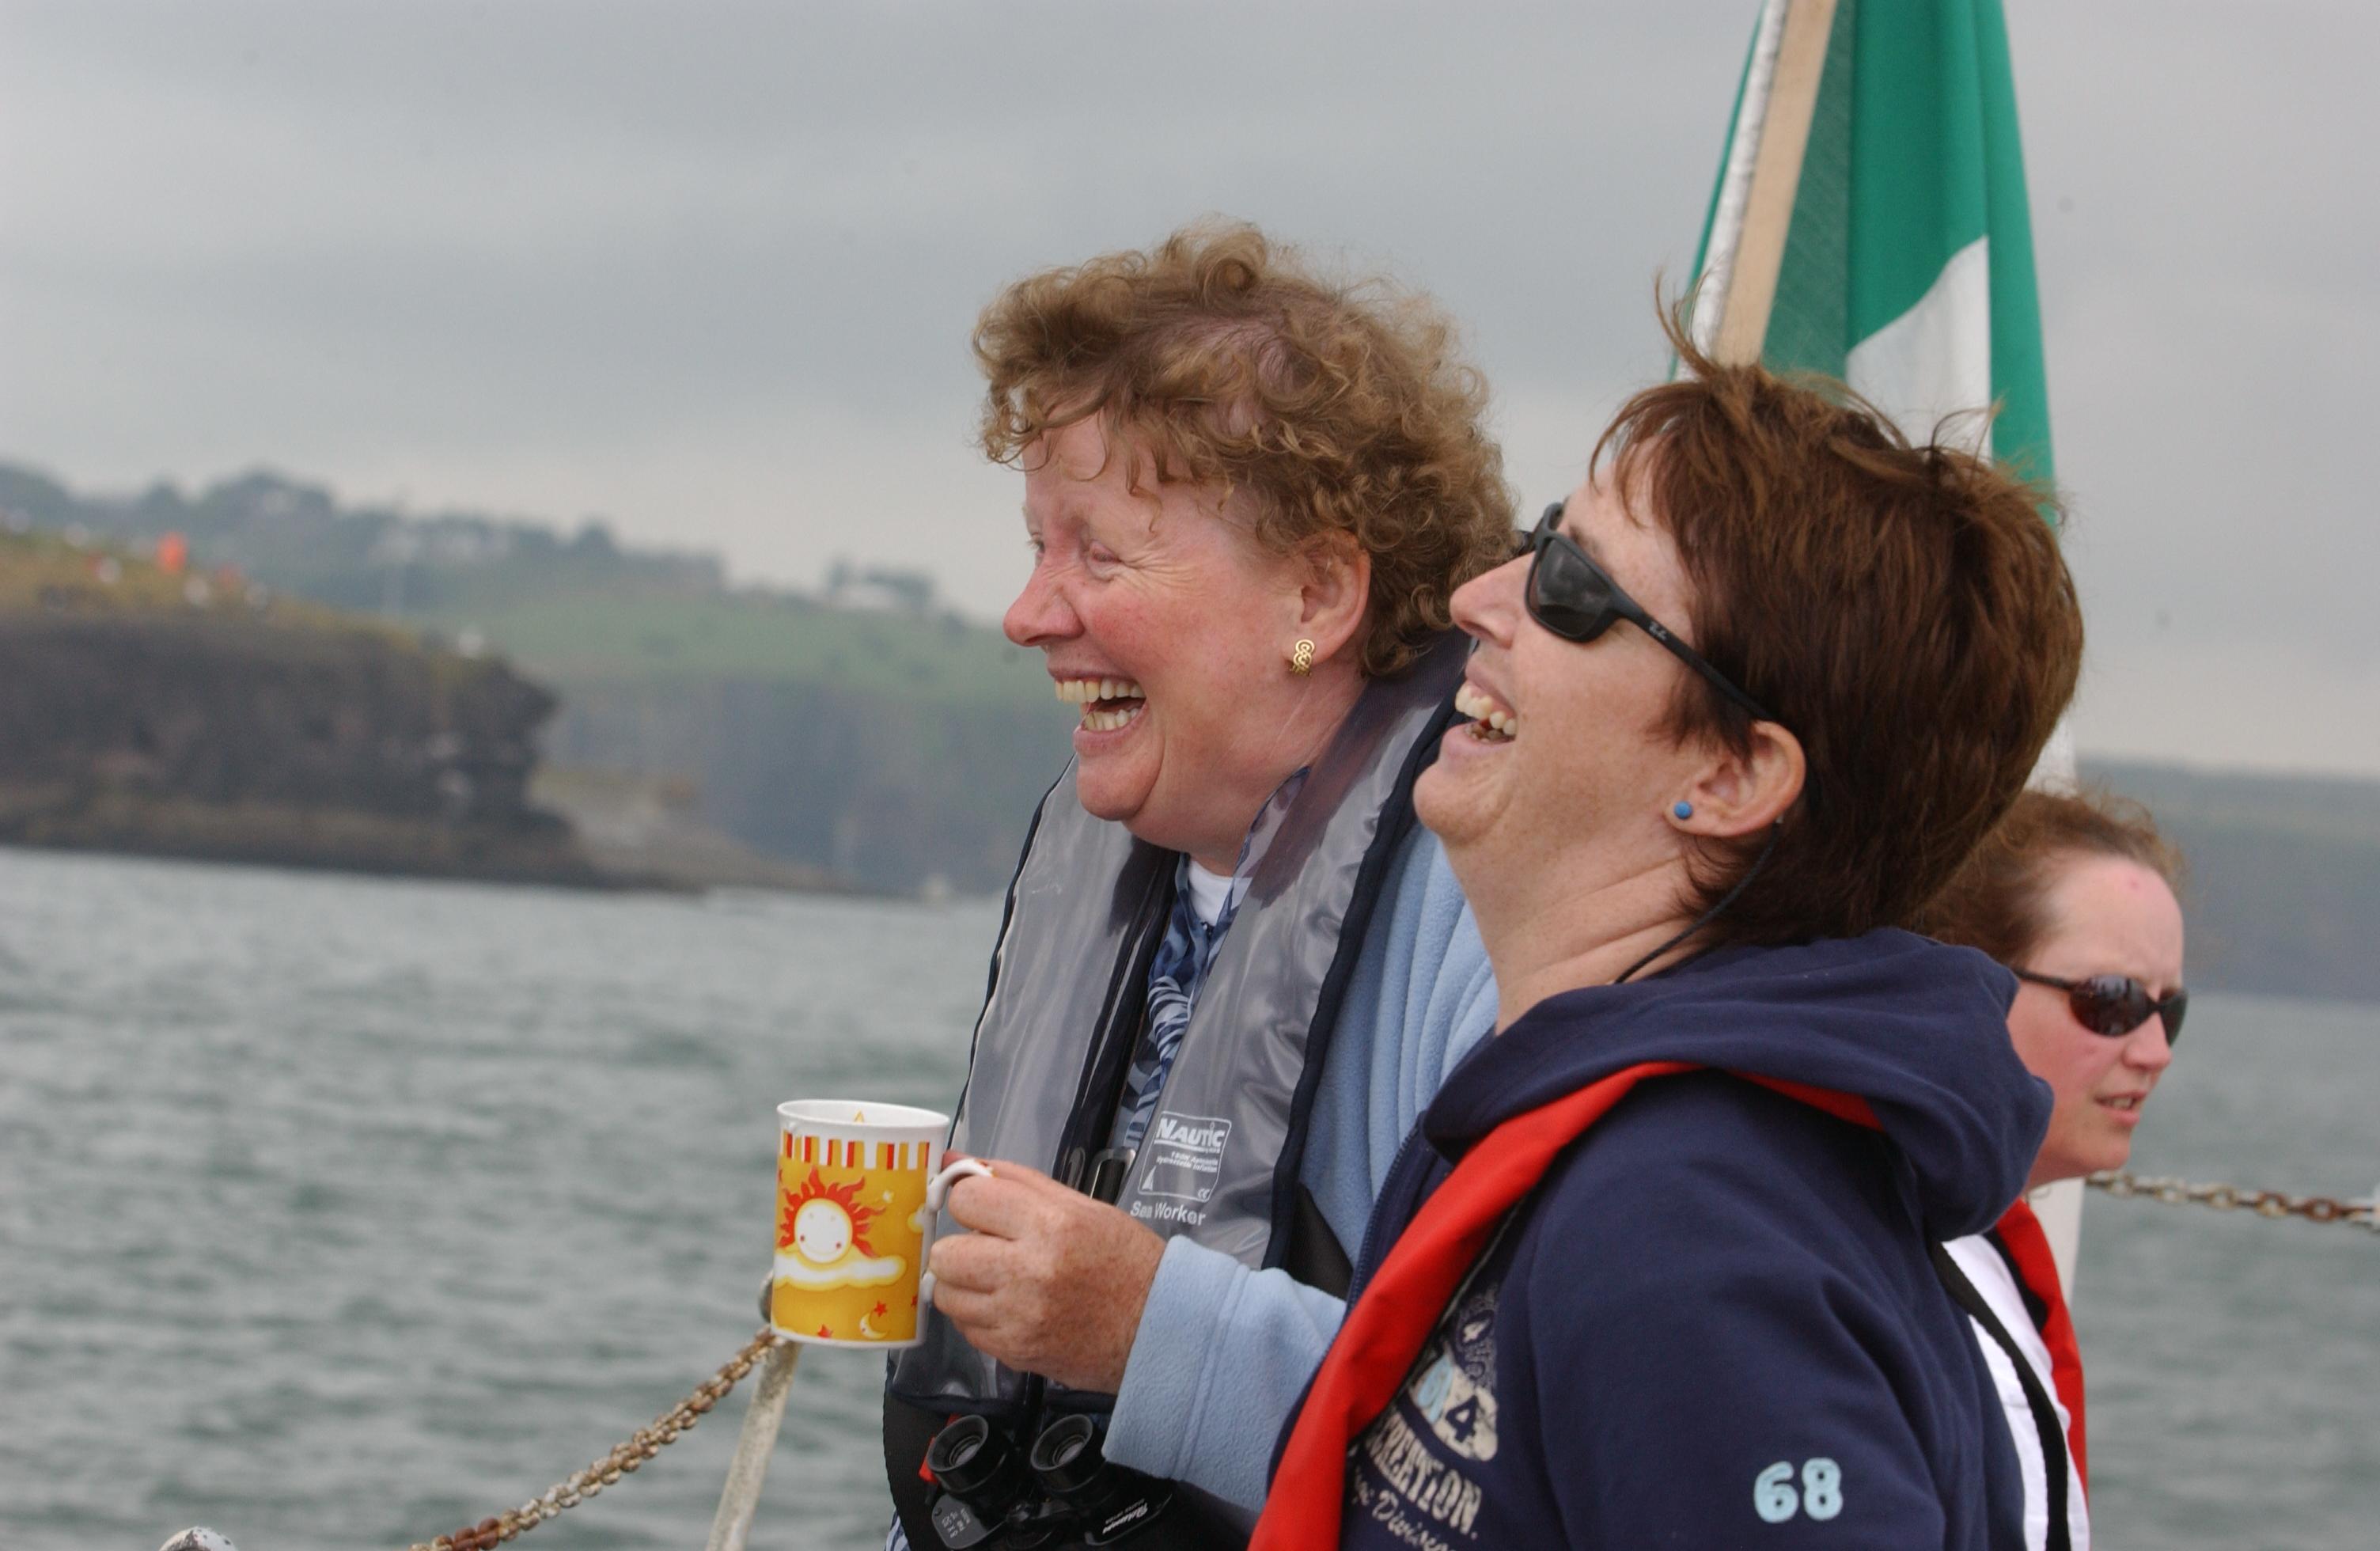 Teresa and Niamh at sea for the Tall Ships race